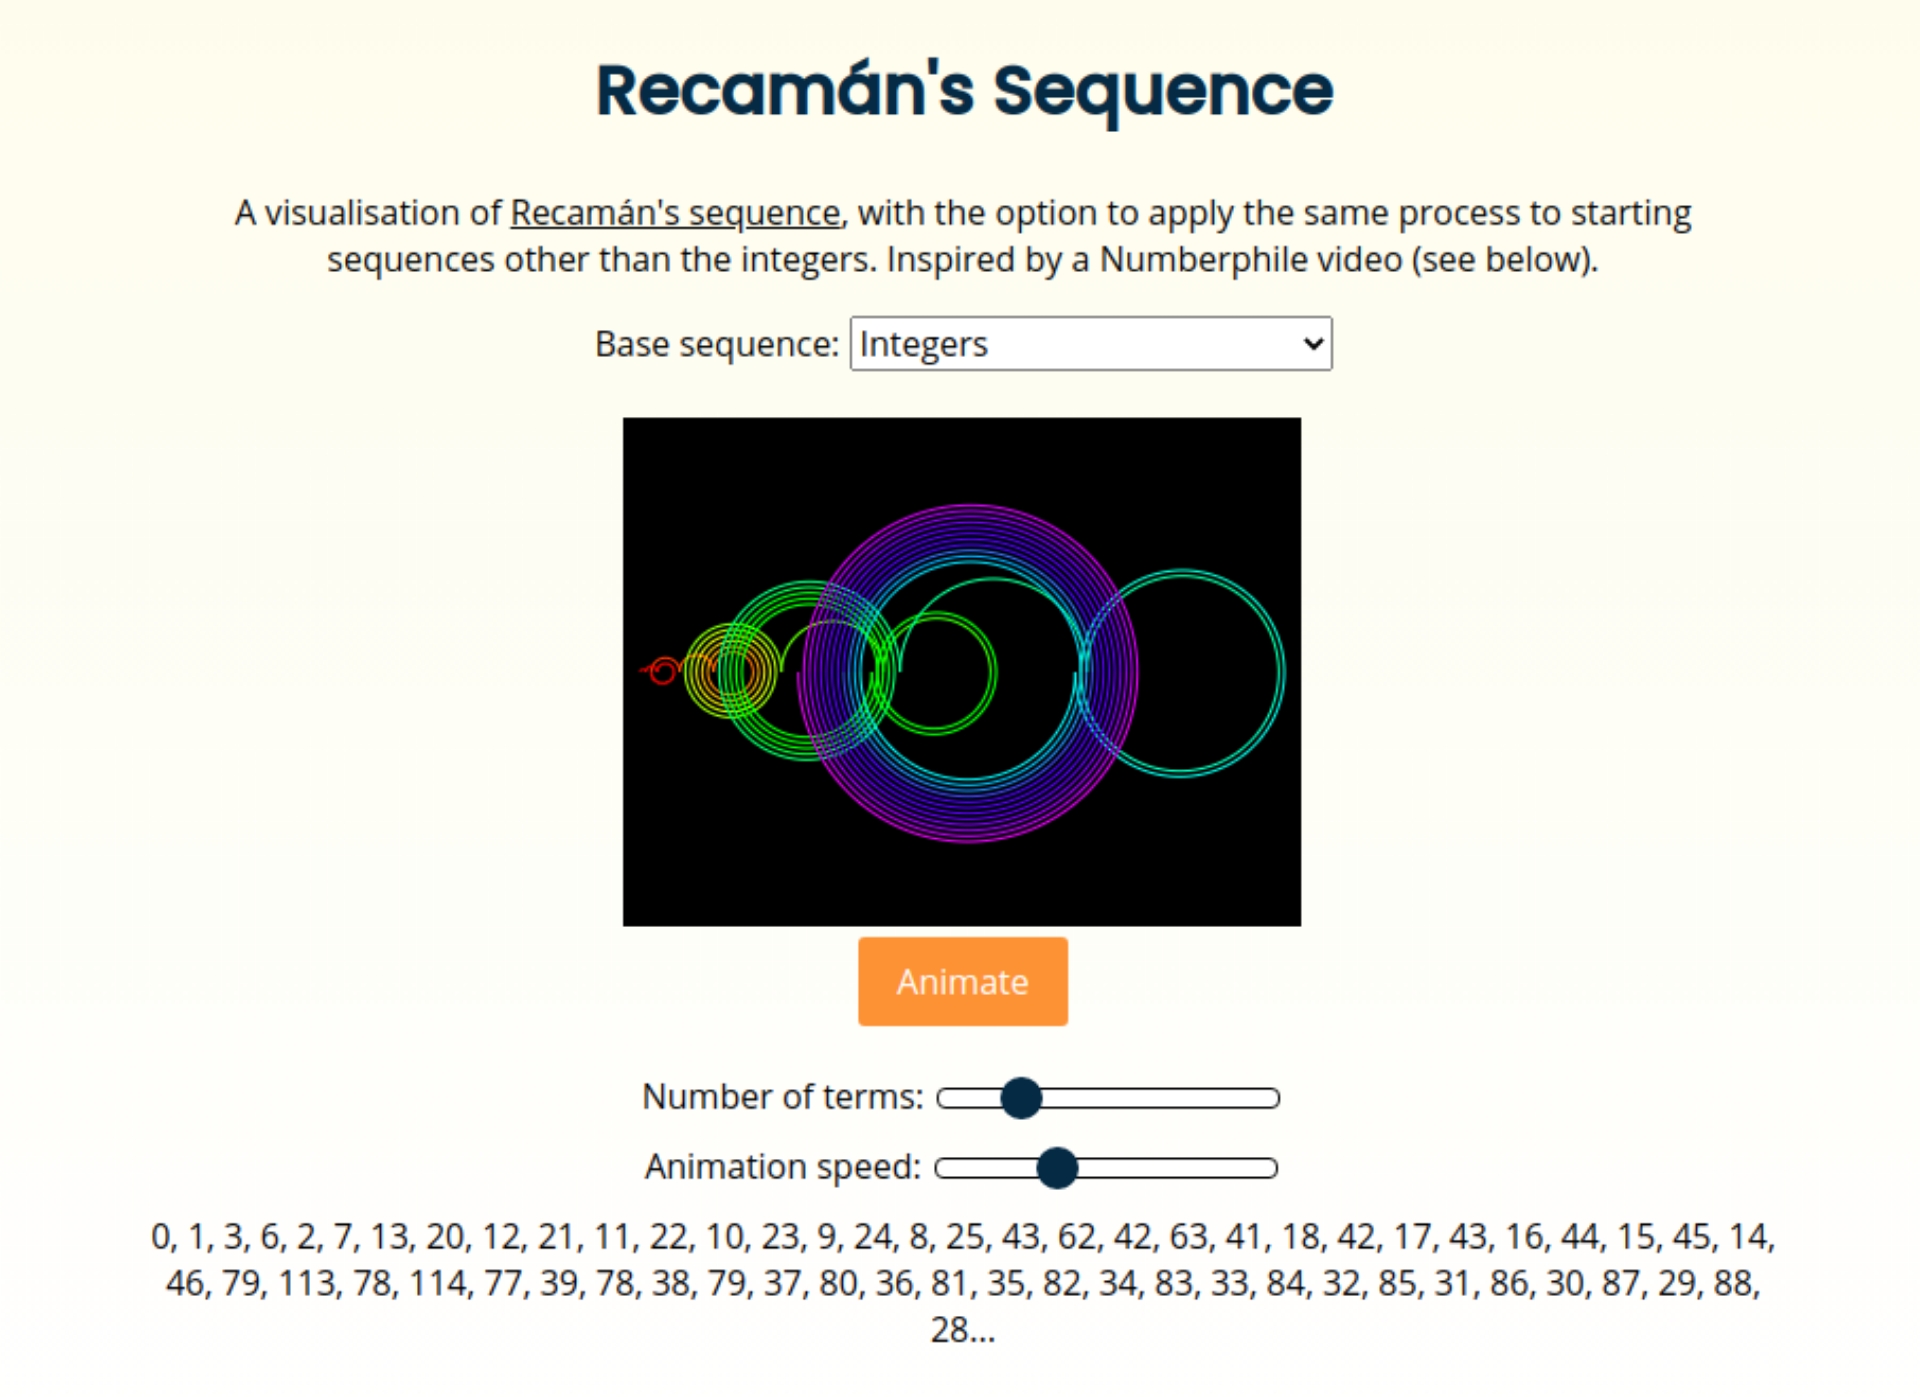 Screenshot of my Recamán's sequence visualisation tool - a curve swirling back and forth representing the first few dozen terms.